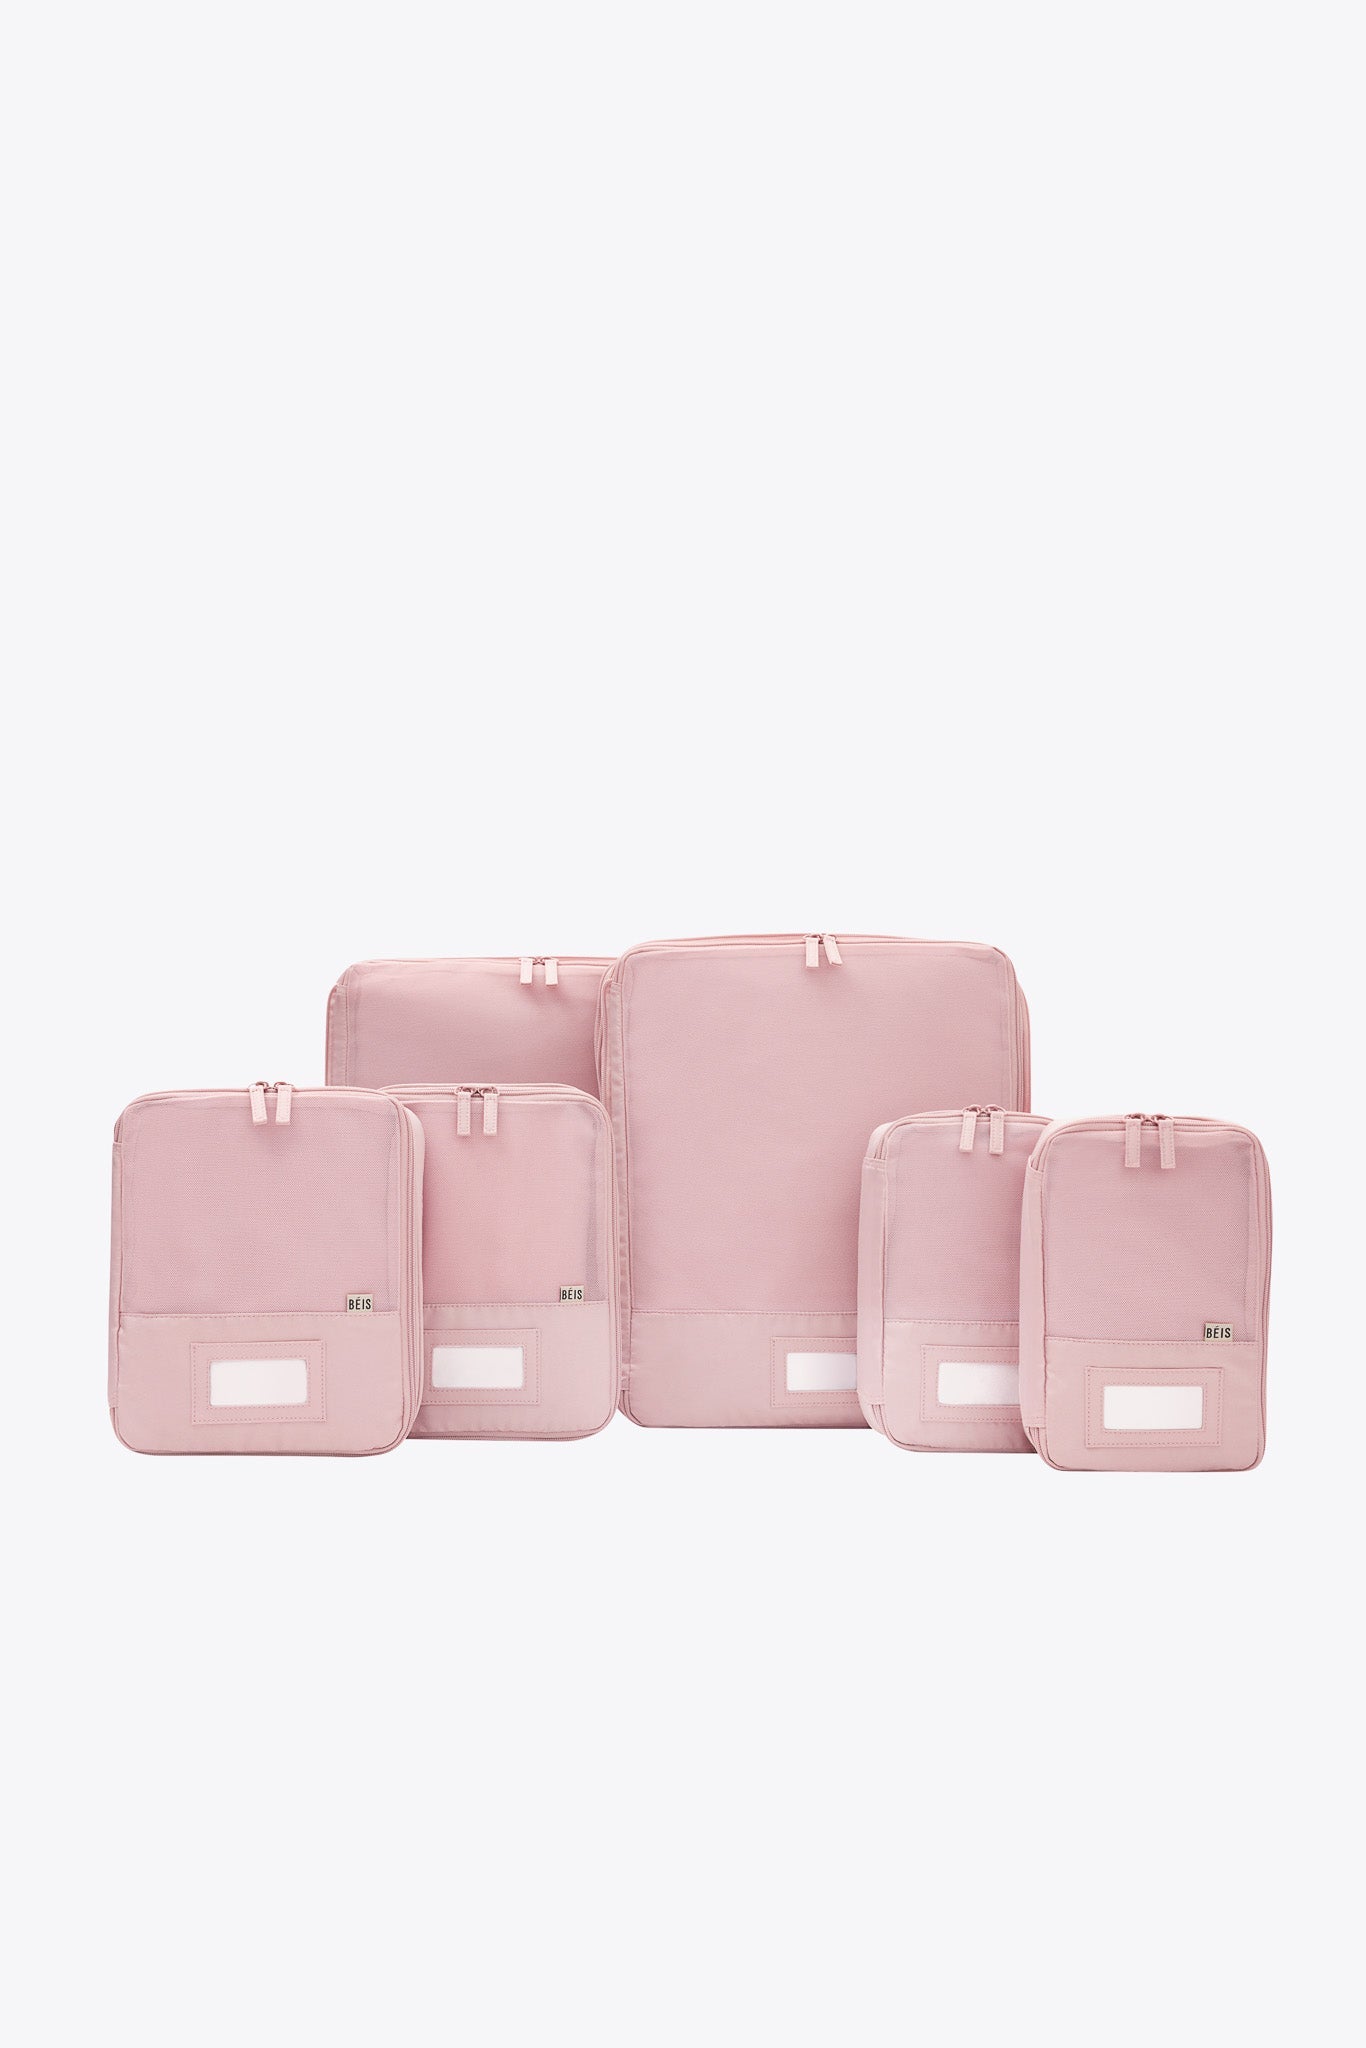 BÉIS 'The Compression Packing Cubes 6 pc' in Atlas Pink - 6 Piece Set Of Packing Compression Bags For Travel